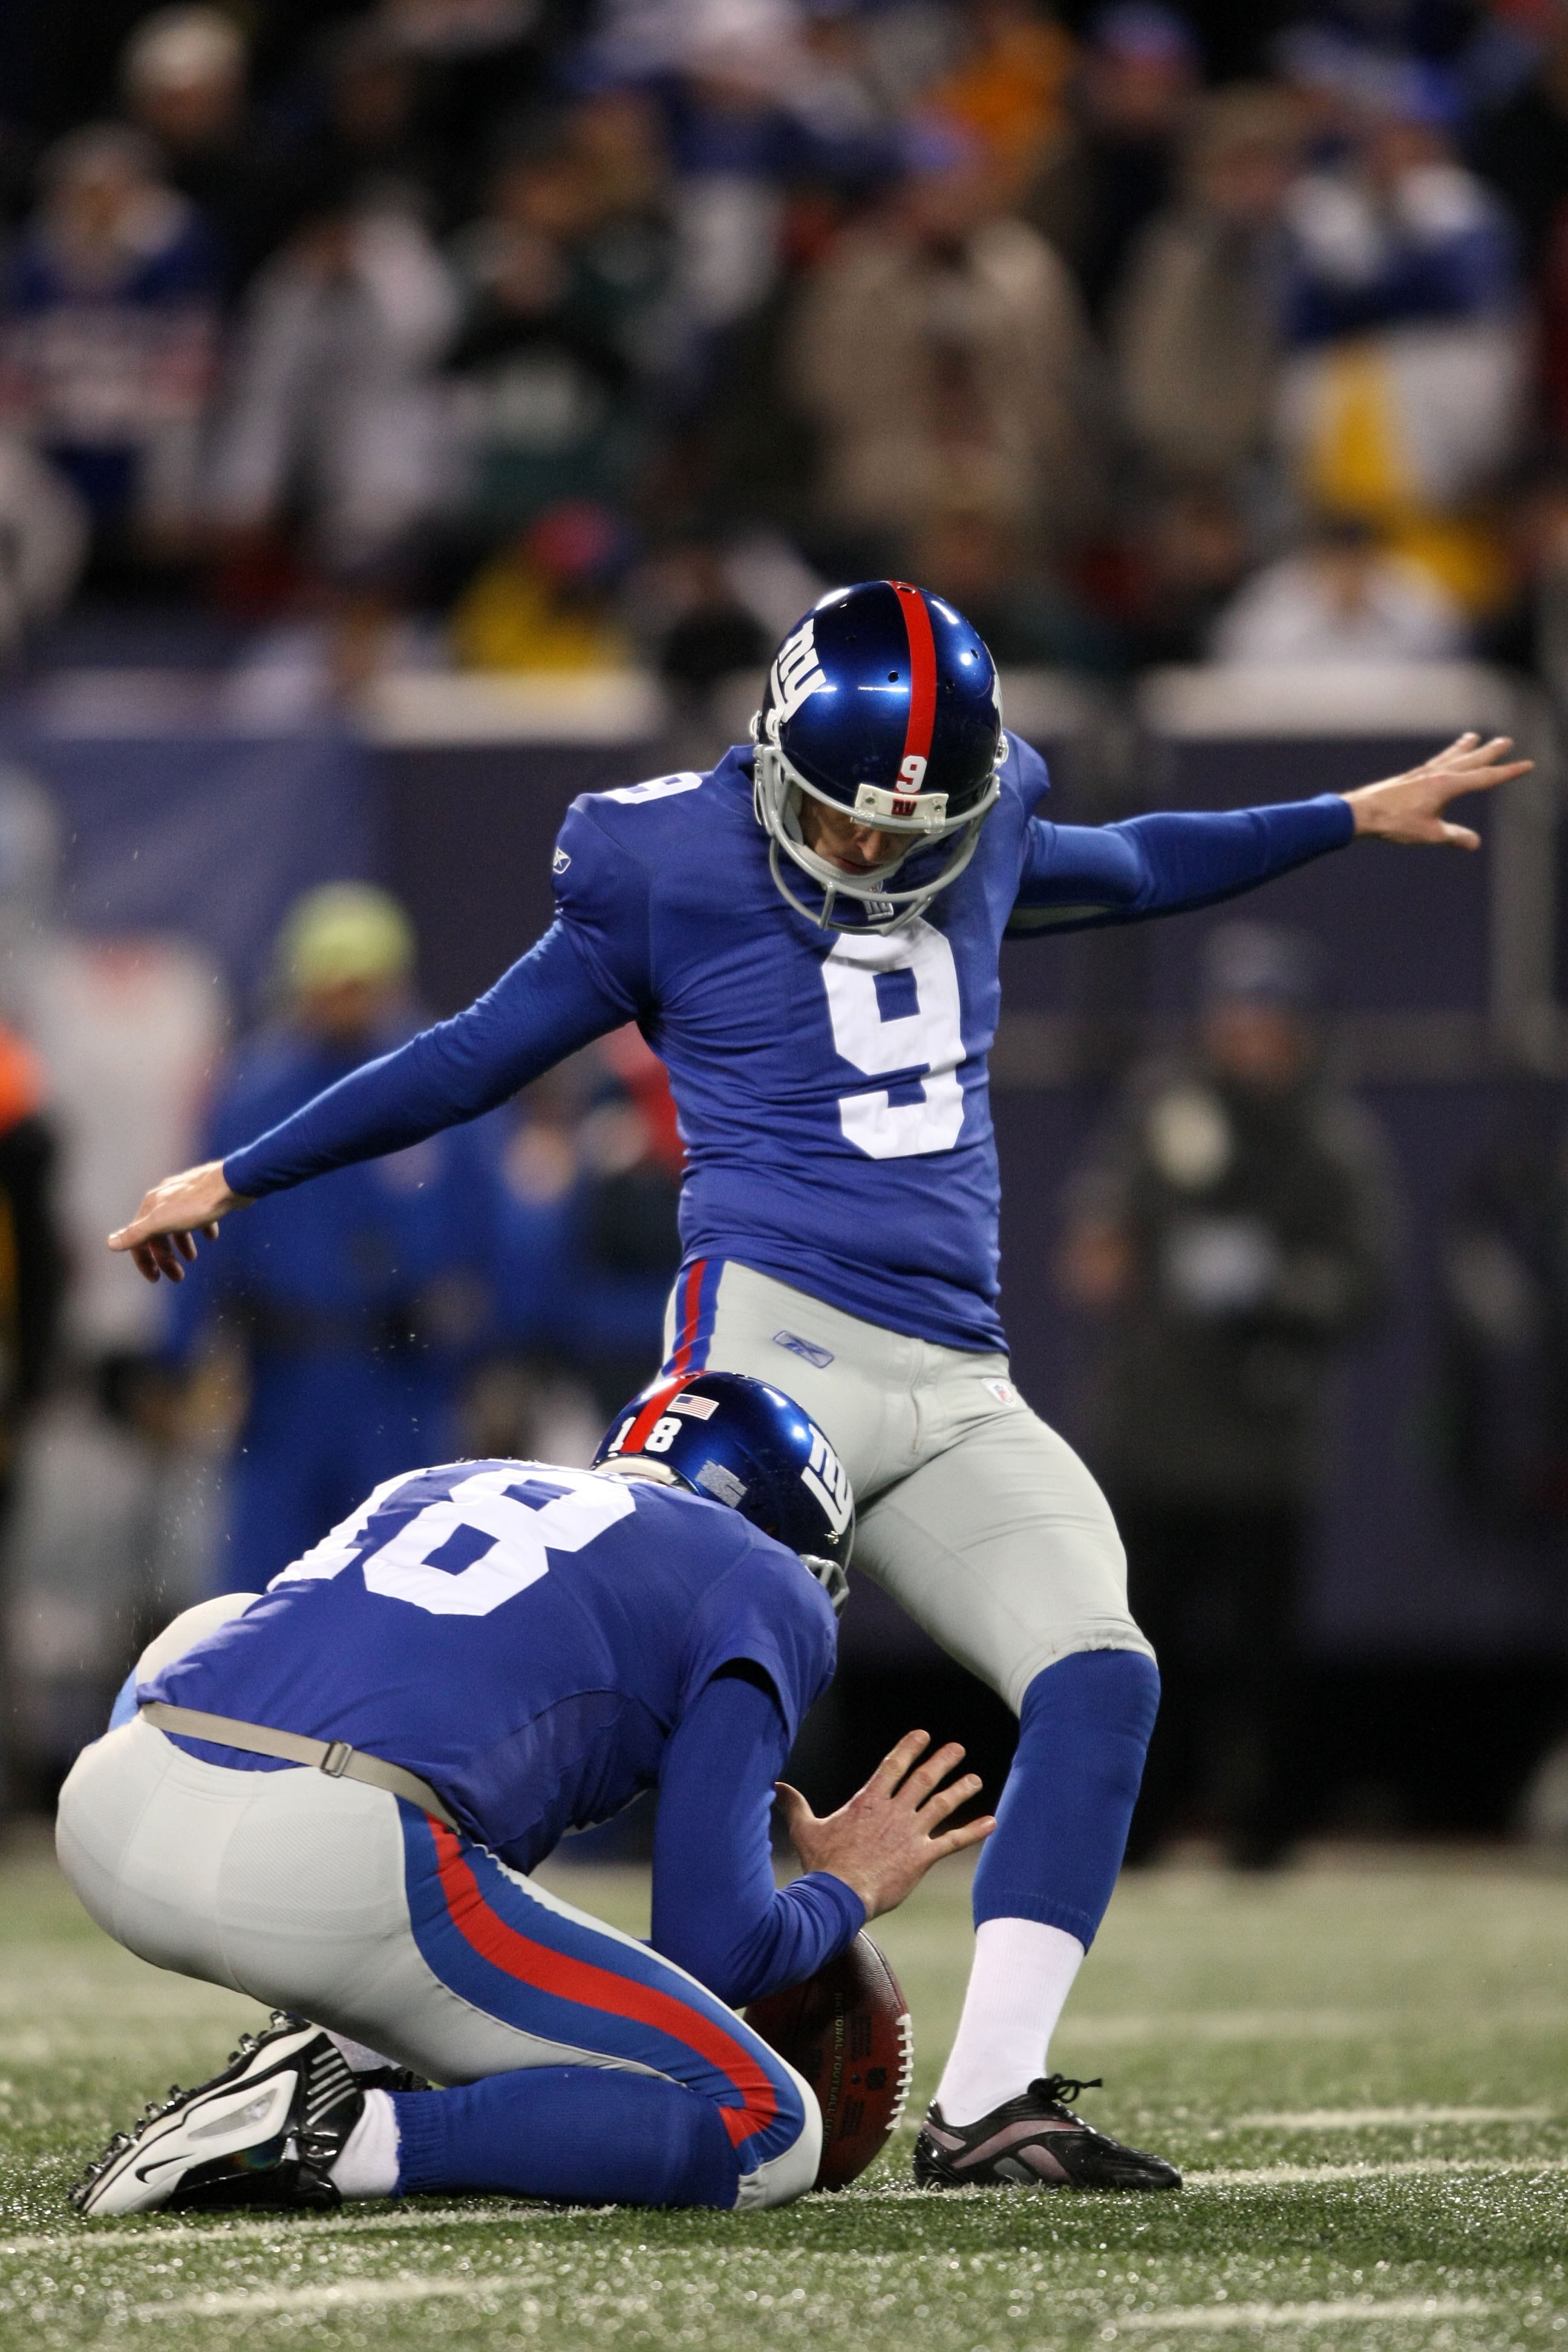 EAST RUTHERFORD, NJ - DECEMBER 13:  Lawrence Tynes #9 of the New York Giants kicks the ball against the Philadelphia Eagles at Giants Stadium on December 13, 2009 in East Rutherford, New Jersey.  (Photo by Nick Laham/Getty Images)